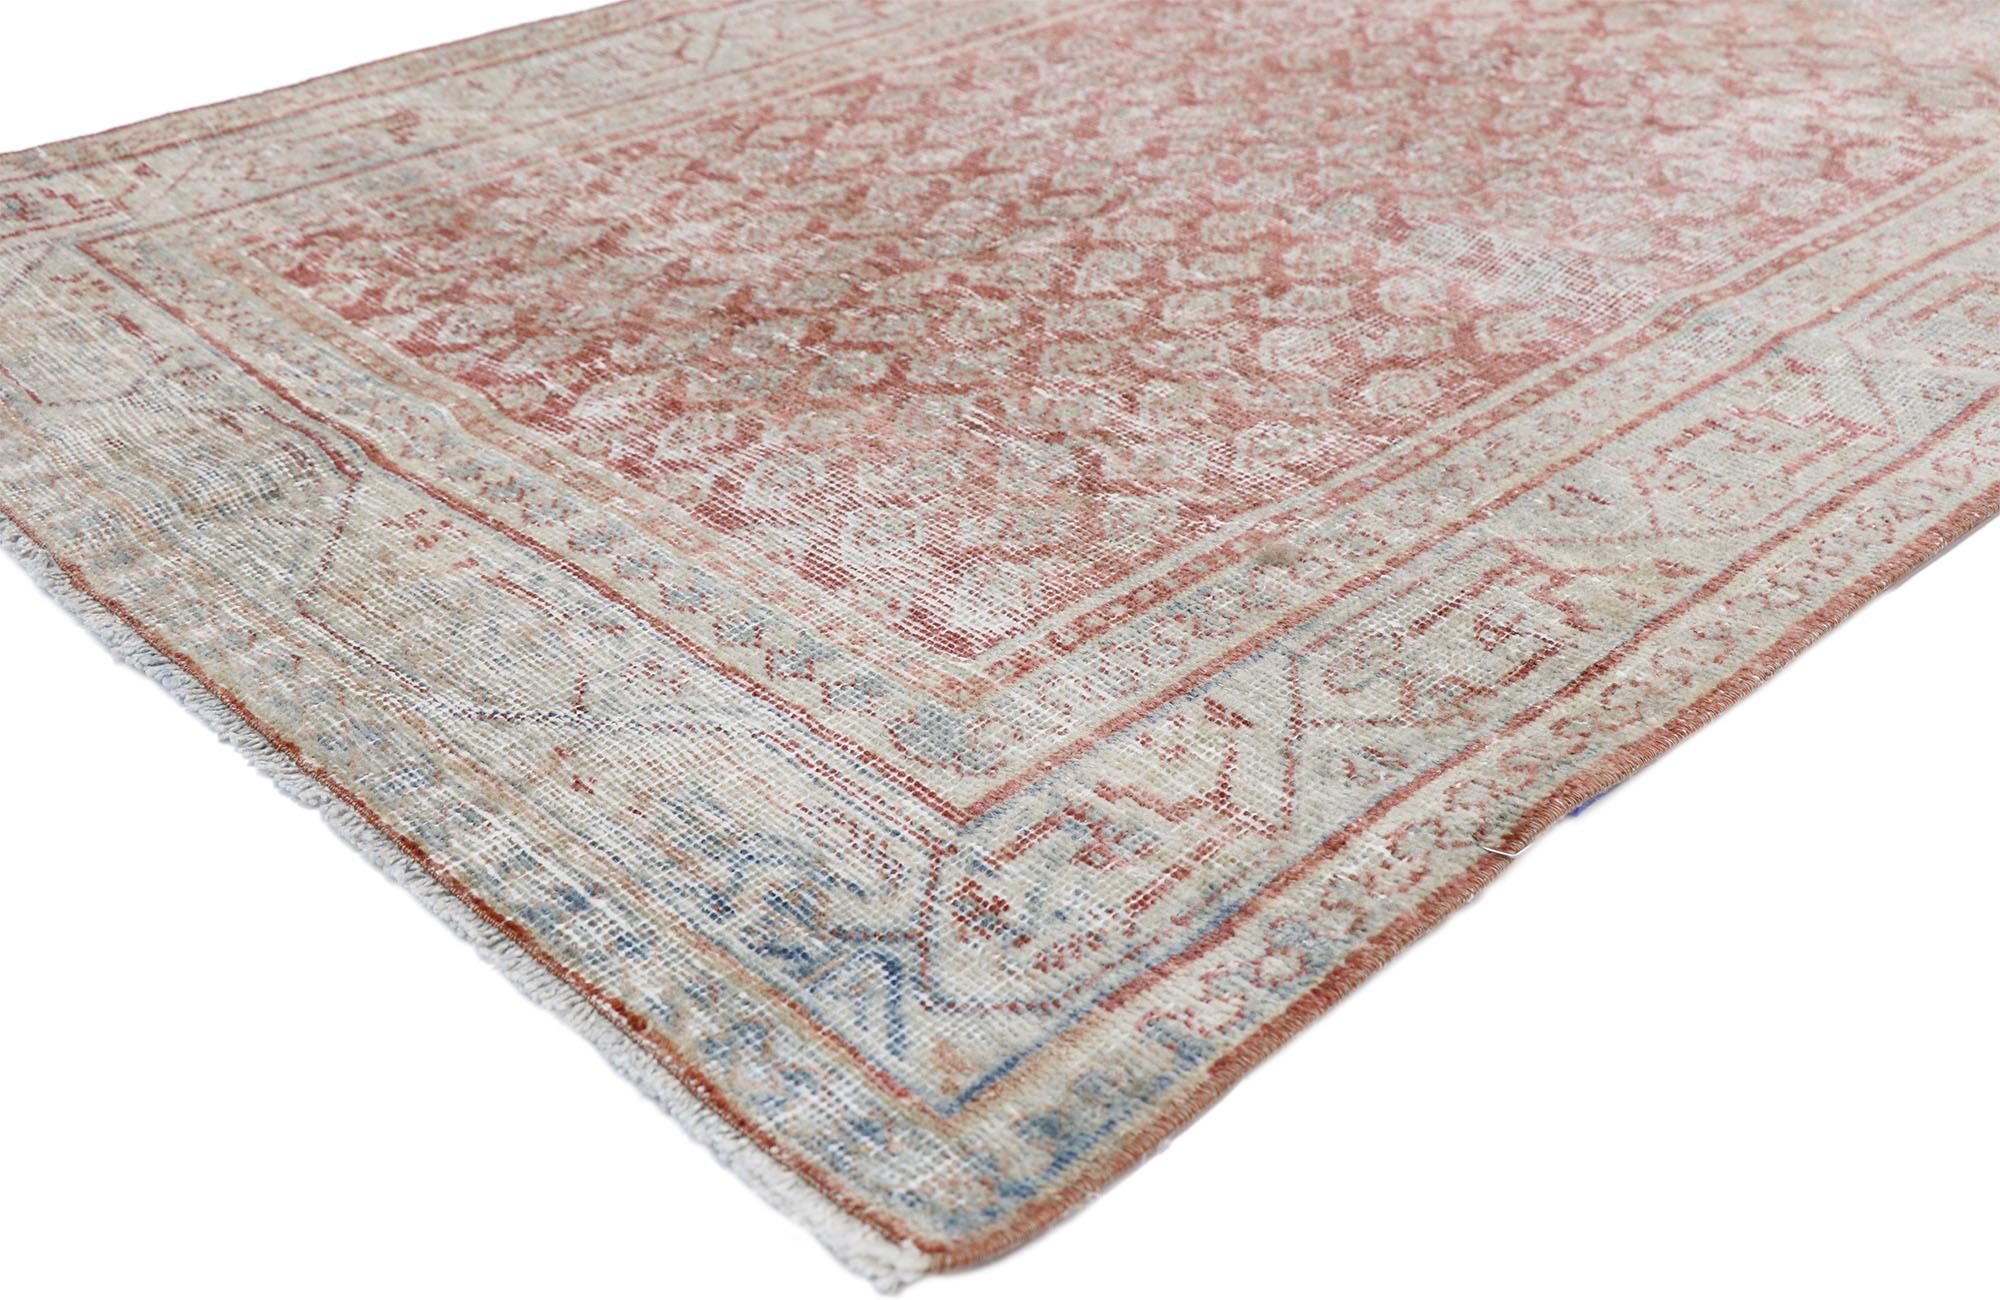 52555 Rustic Antique Persian Mahal Rug, 03'04 x 10'02.
Weathered beauty meets timeless appeal in this hand knotted wool distressed antique Persian Mahal rug. The faded botanical design and muted colors woven into this piece work together creating a